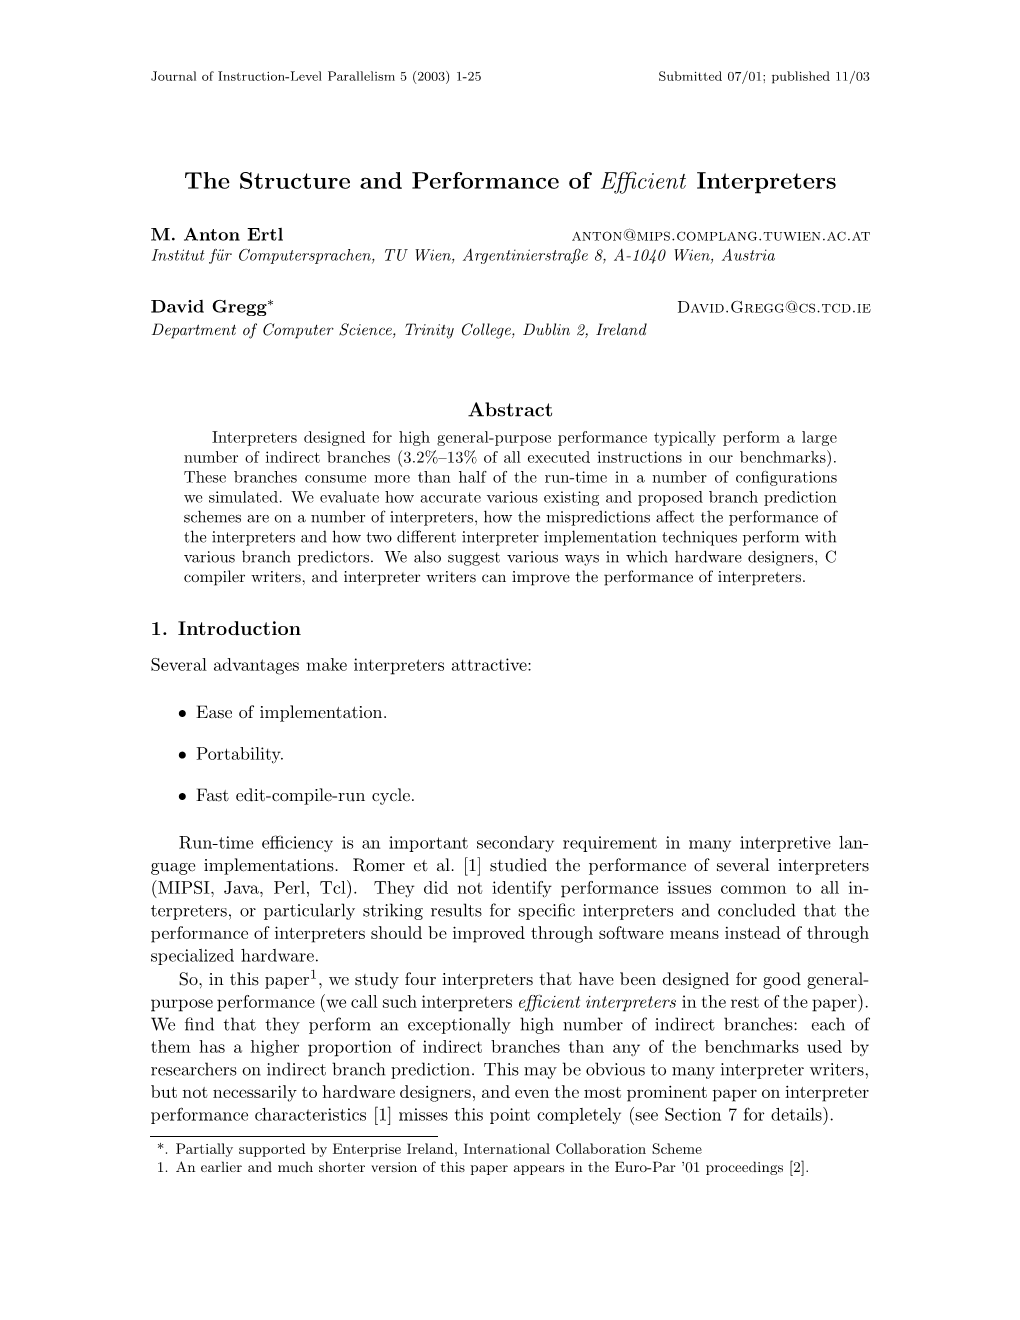 The Structure and Performance of Efficient Interpreters